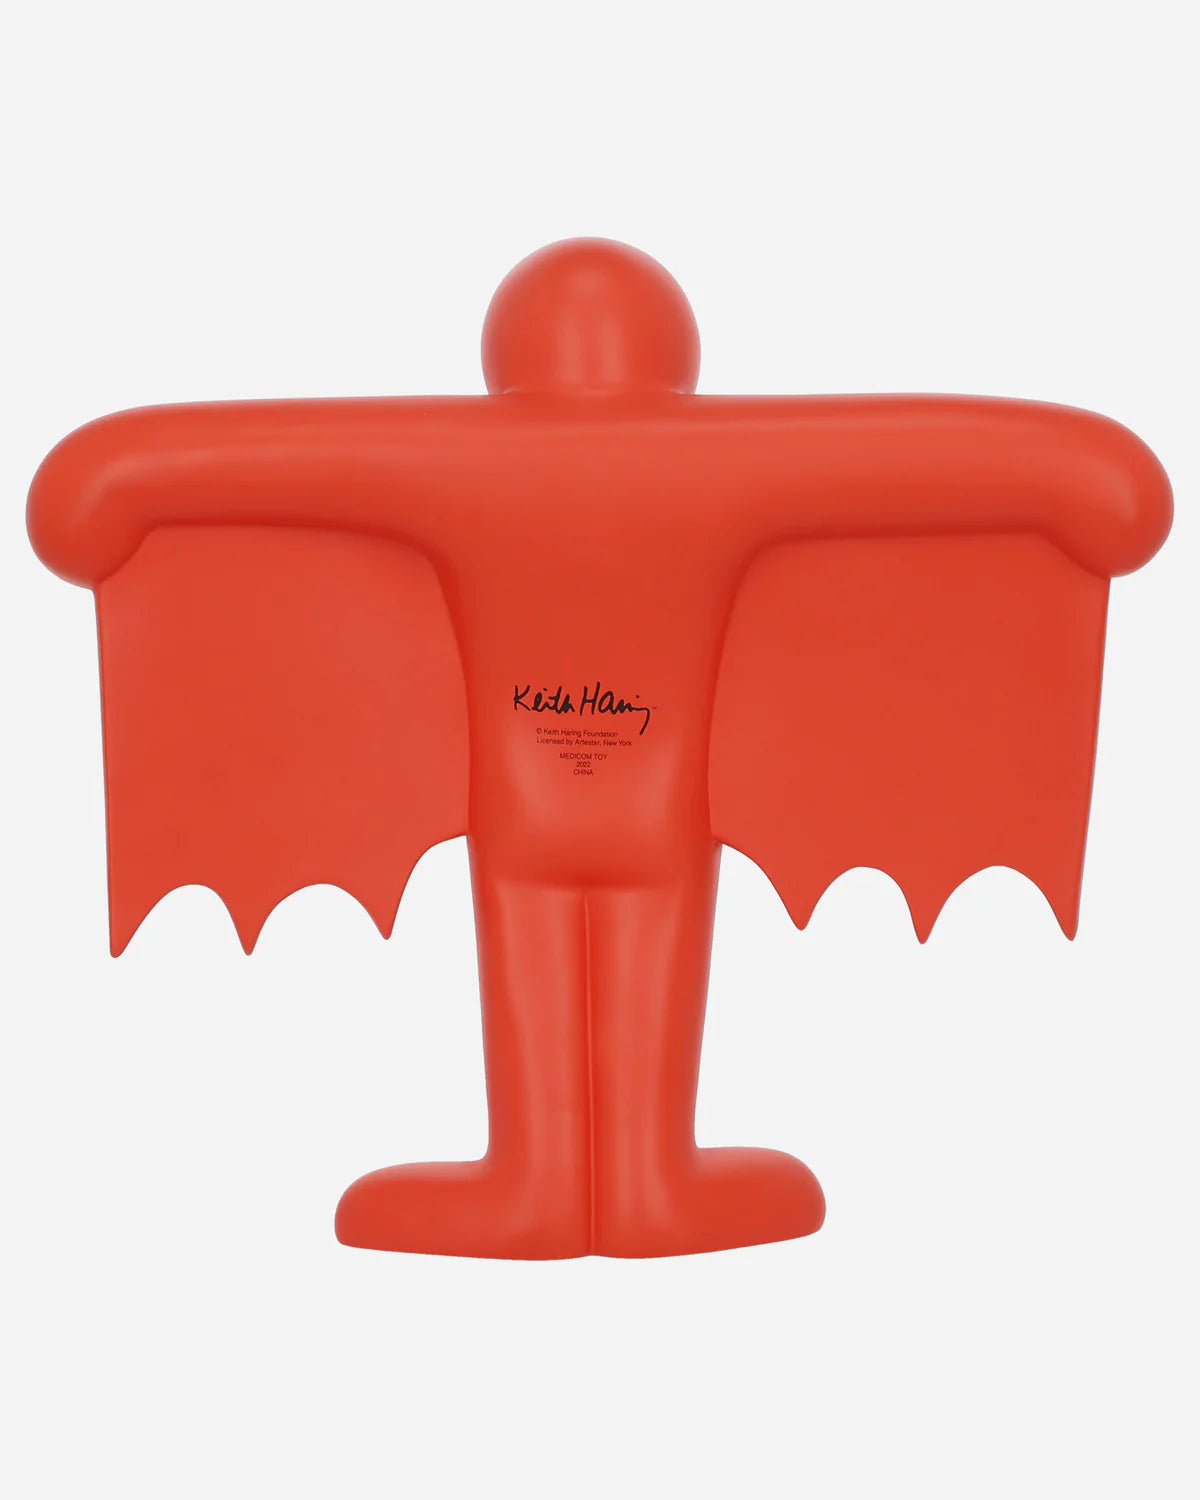 Flying Devil Statue (RED VERSION) by Keith Haring x Medicom Toy